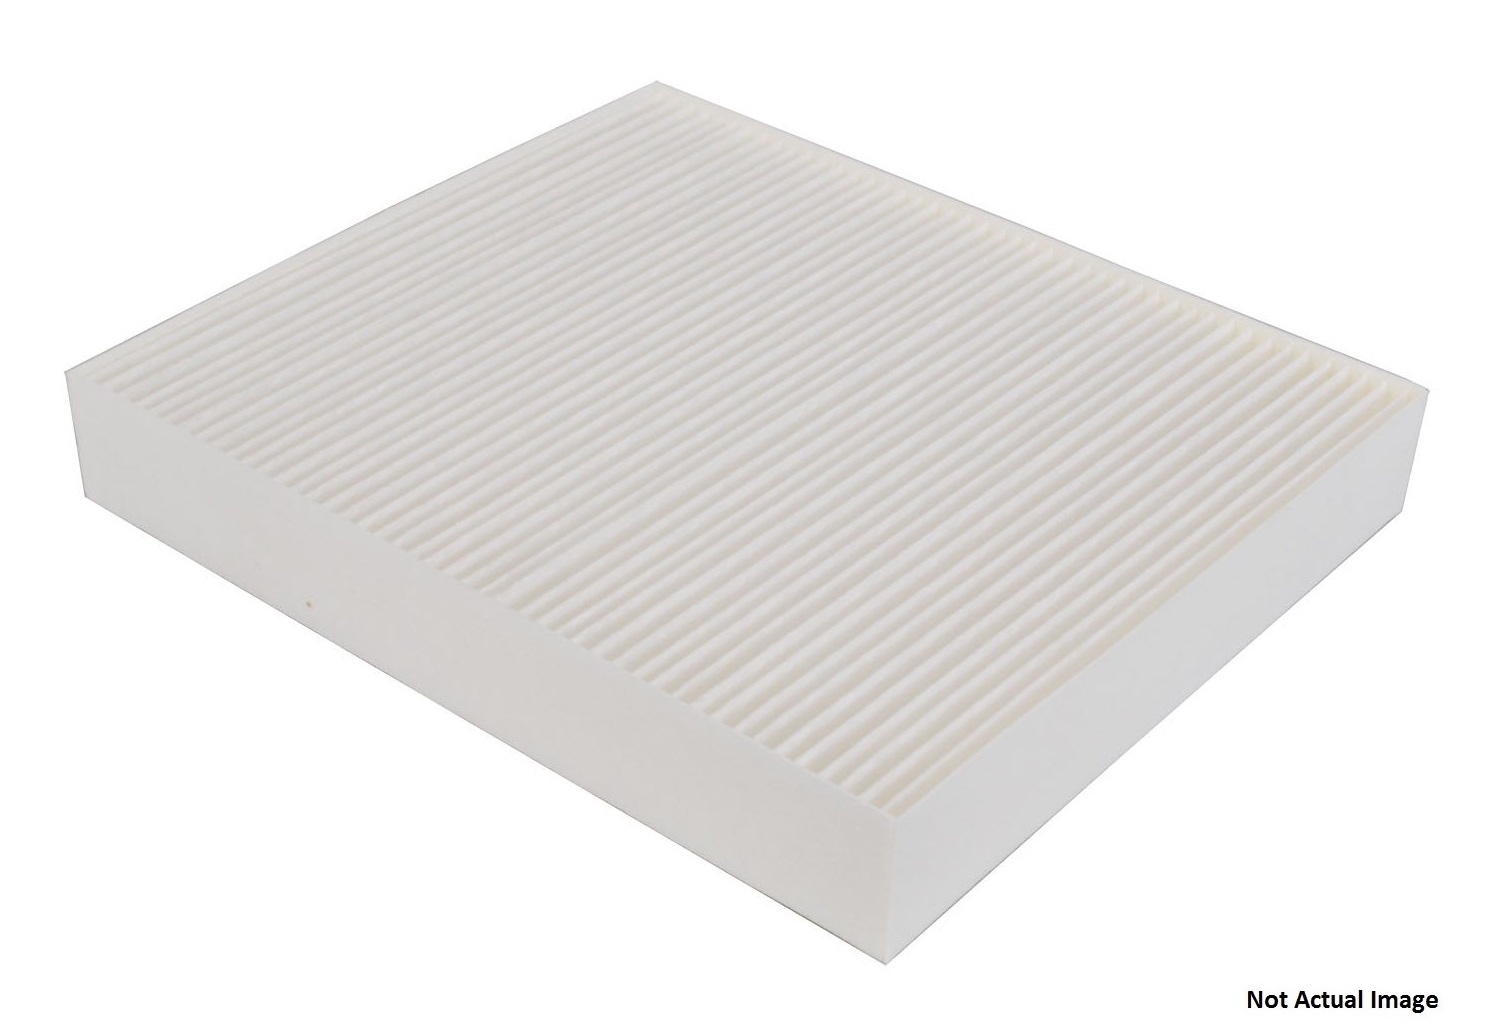 PREMIUM Cabin Air Filter set for NISSAN 2004-2009 Quest REPLACE 27299-5Z000